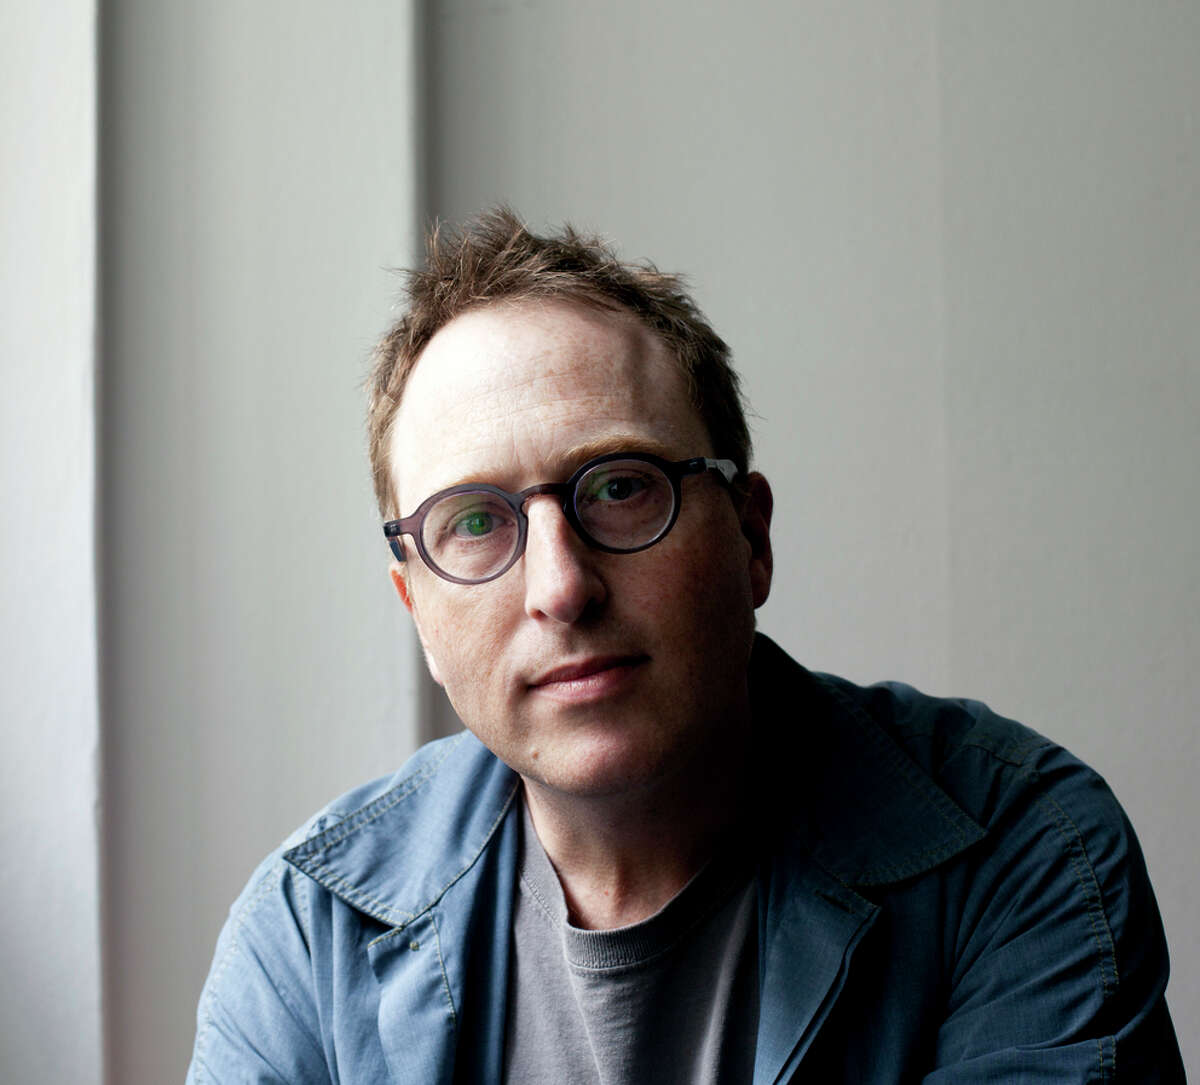 “It’s a very weird thing that we punish people with the things that we would be most horrified if it happened to us,” says Jon Ronson.